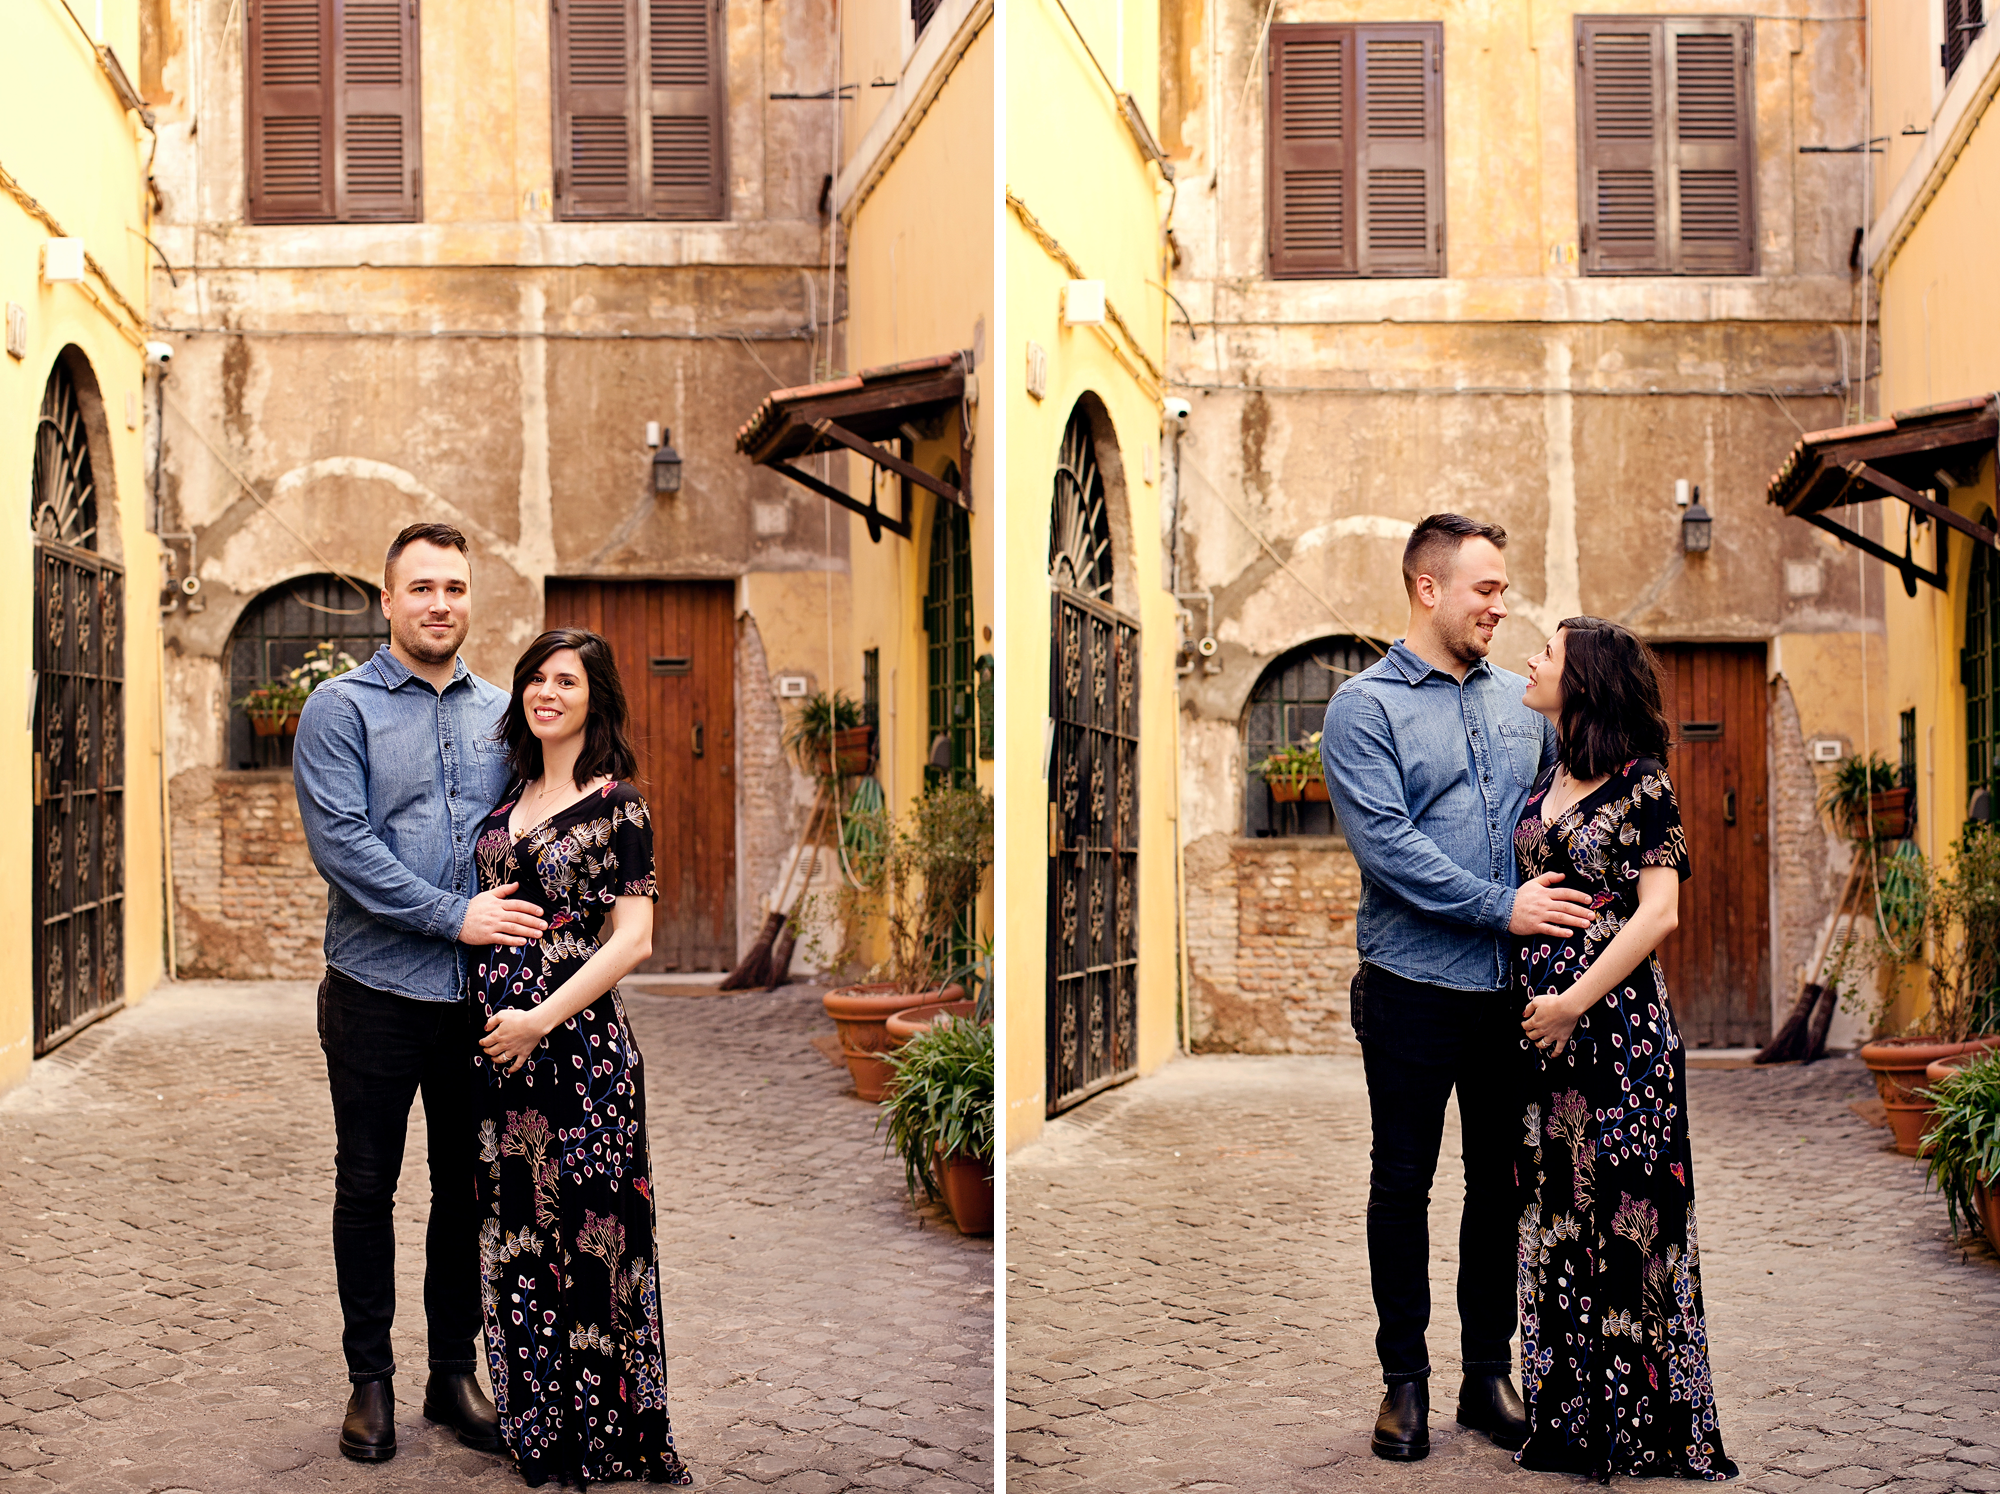 Honeymoon, vacation, family, engagement, maternity, wedding, love story individual and solo photoshoots in Rome, Italy by photographer Tricia Anne Photography | Rome Photographer, vacation, tripadvisor, instagram, fun, married, bride, groom, love story, photography session rome, photoshoot rome, wedding photographer, vacation photographer, engagement photo, honeymoon photoshoot, rome honeymoon, rome wedding, elopement in Rome, honeymoon photographer rome, maternity photo shoot